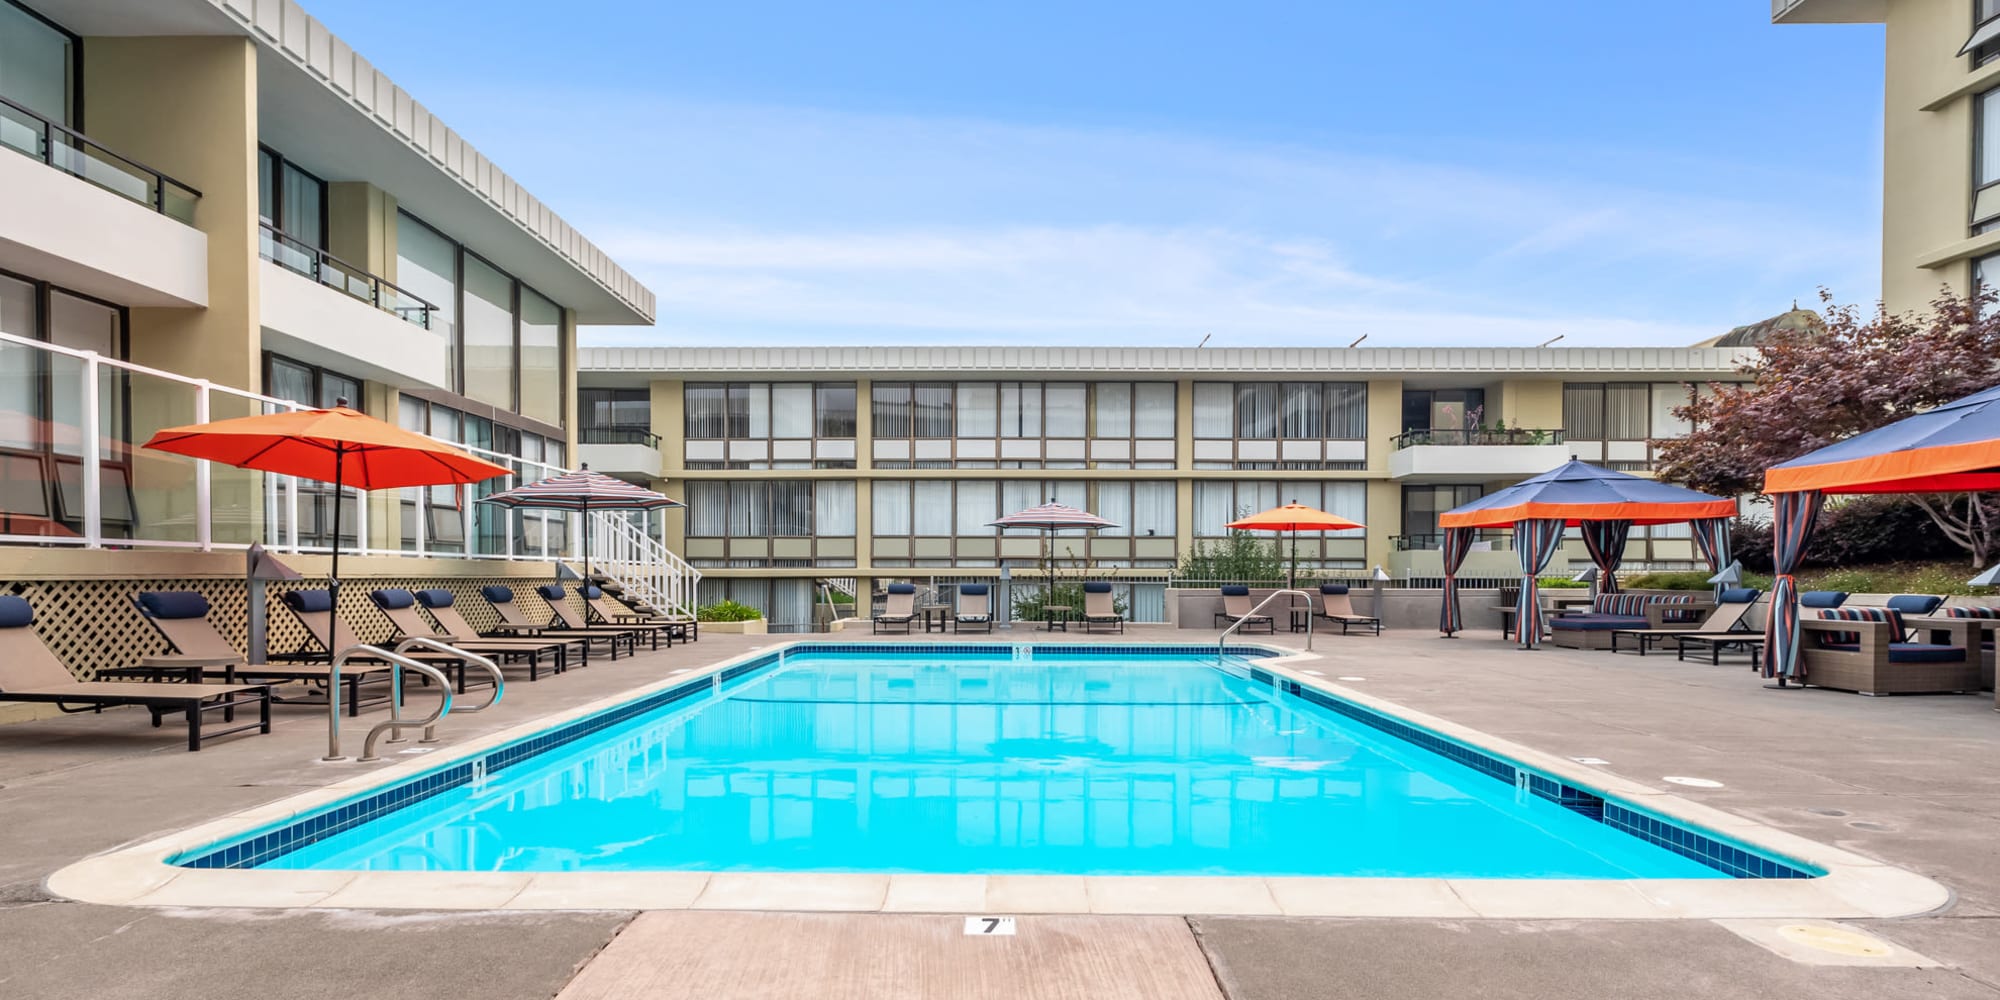 Apartments at Skyline Terrace Apartments in Burlingame, California